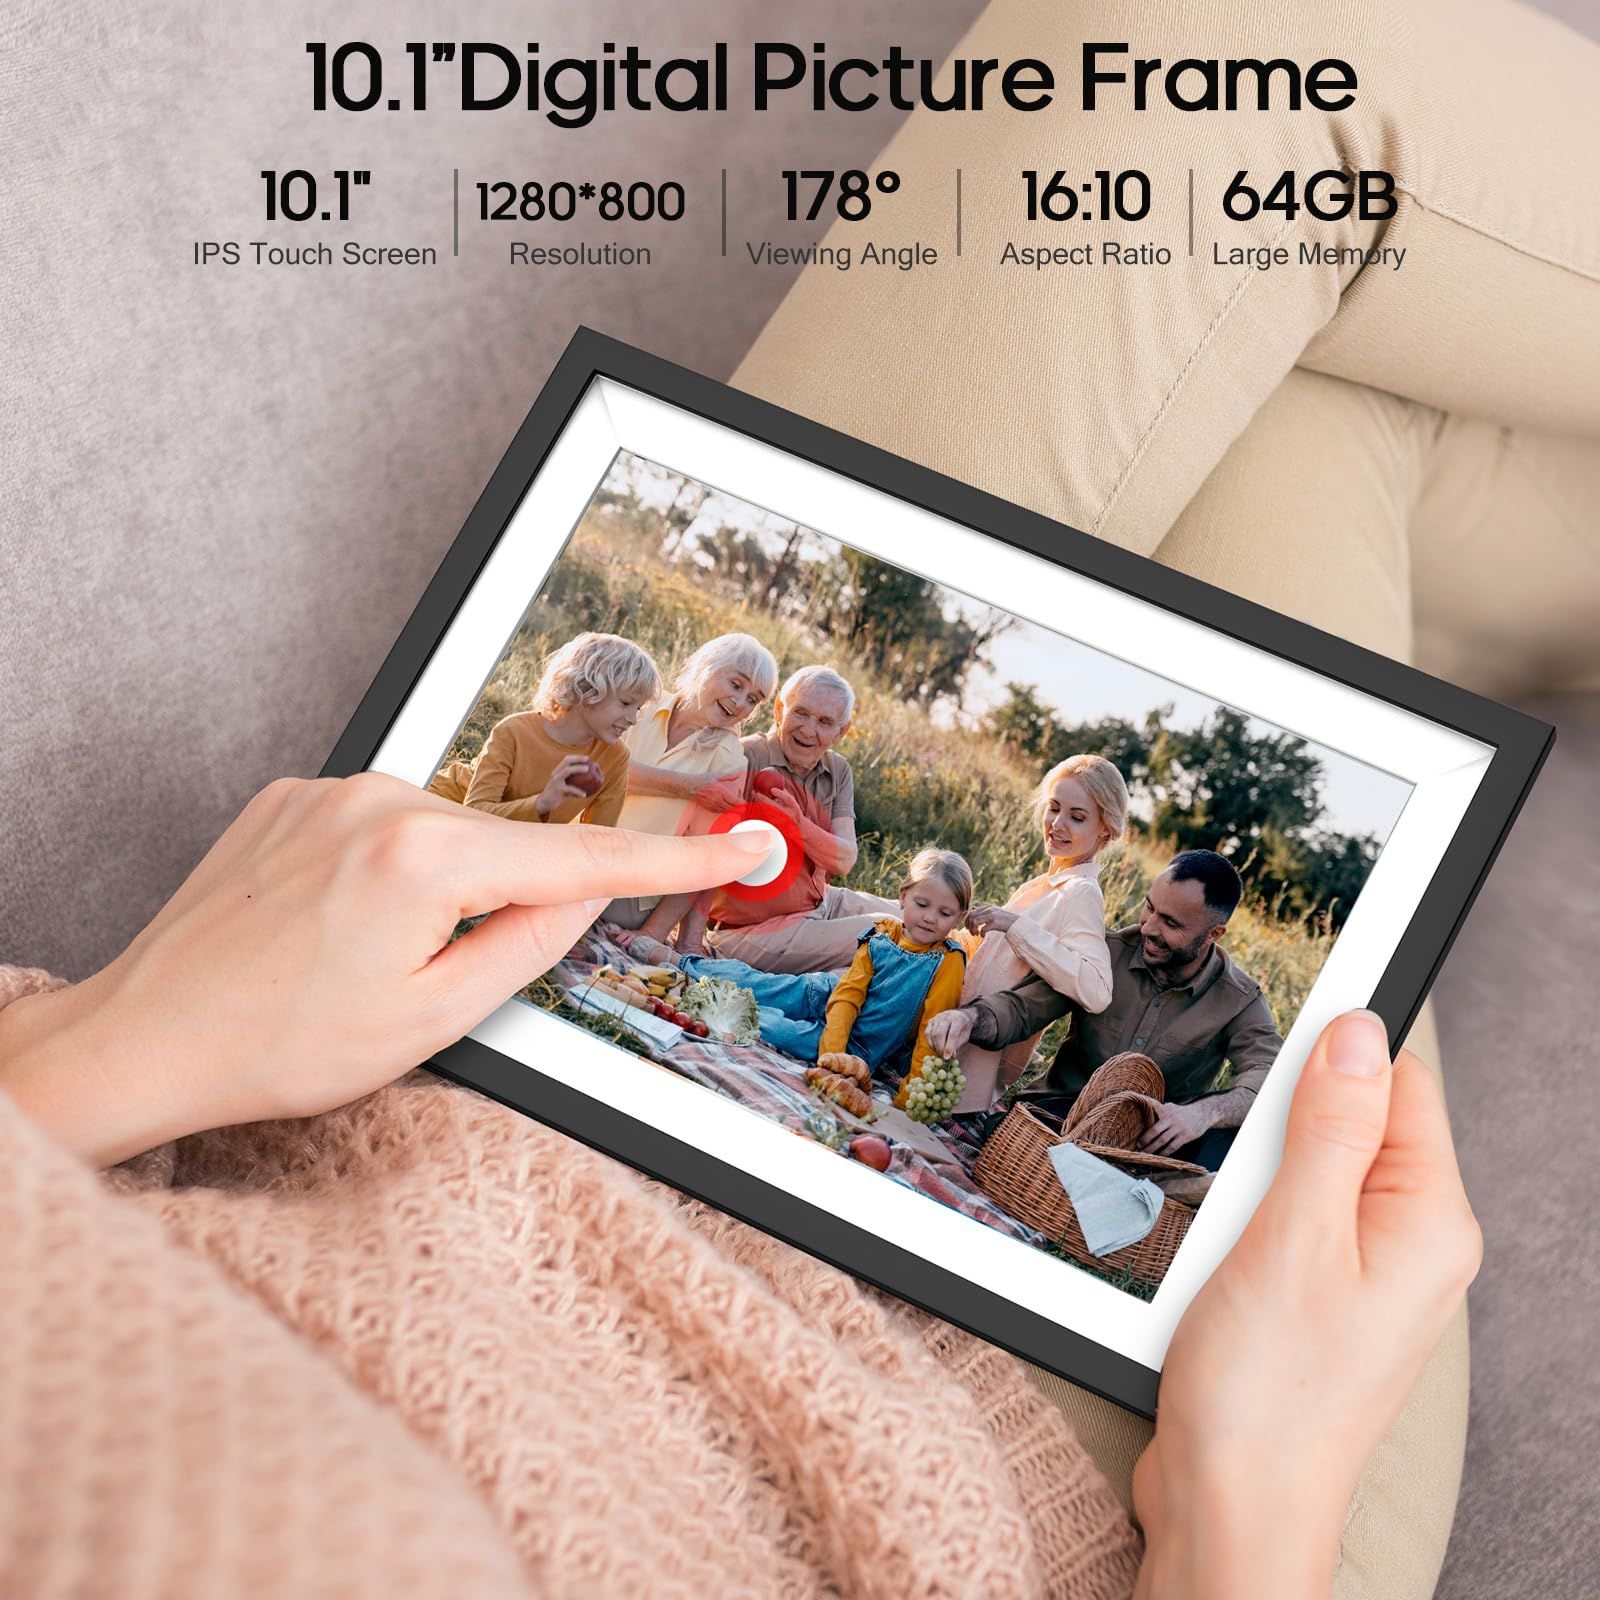 Digital Picture Frame 10.1 Inch, Frameo Digital Frame WiFi with 64GB Large Storage,1280 x 800 HD IPS Touch Screen, Electronic Picture Frame, Auto-Rotate and Slideshow, Share Photo & Video Instantly | Amazon (US)